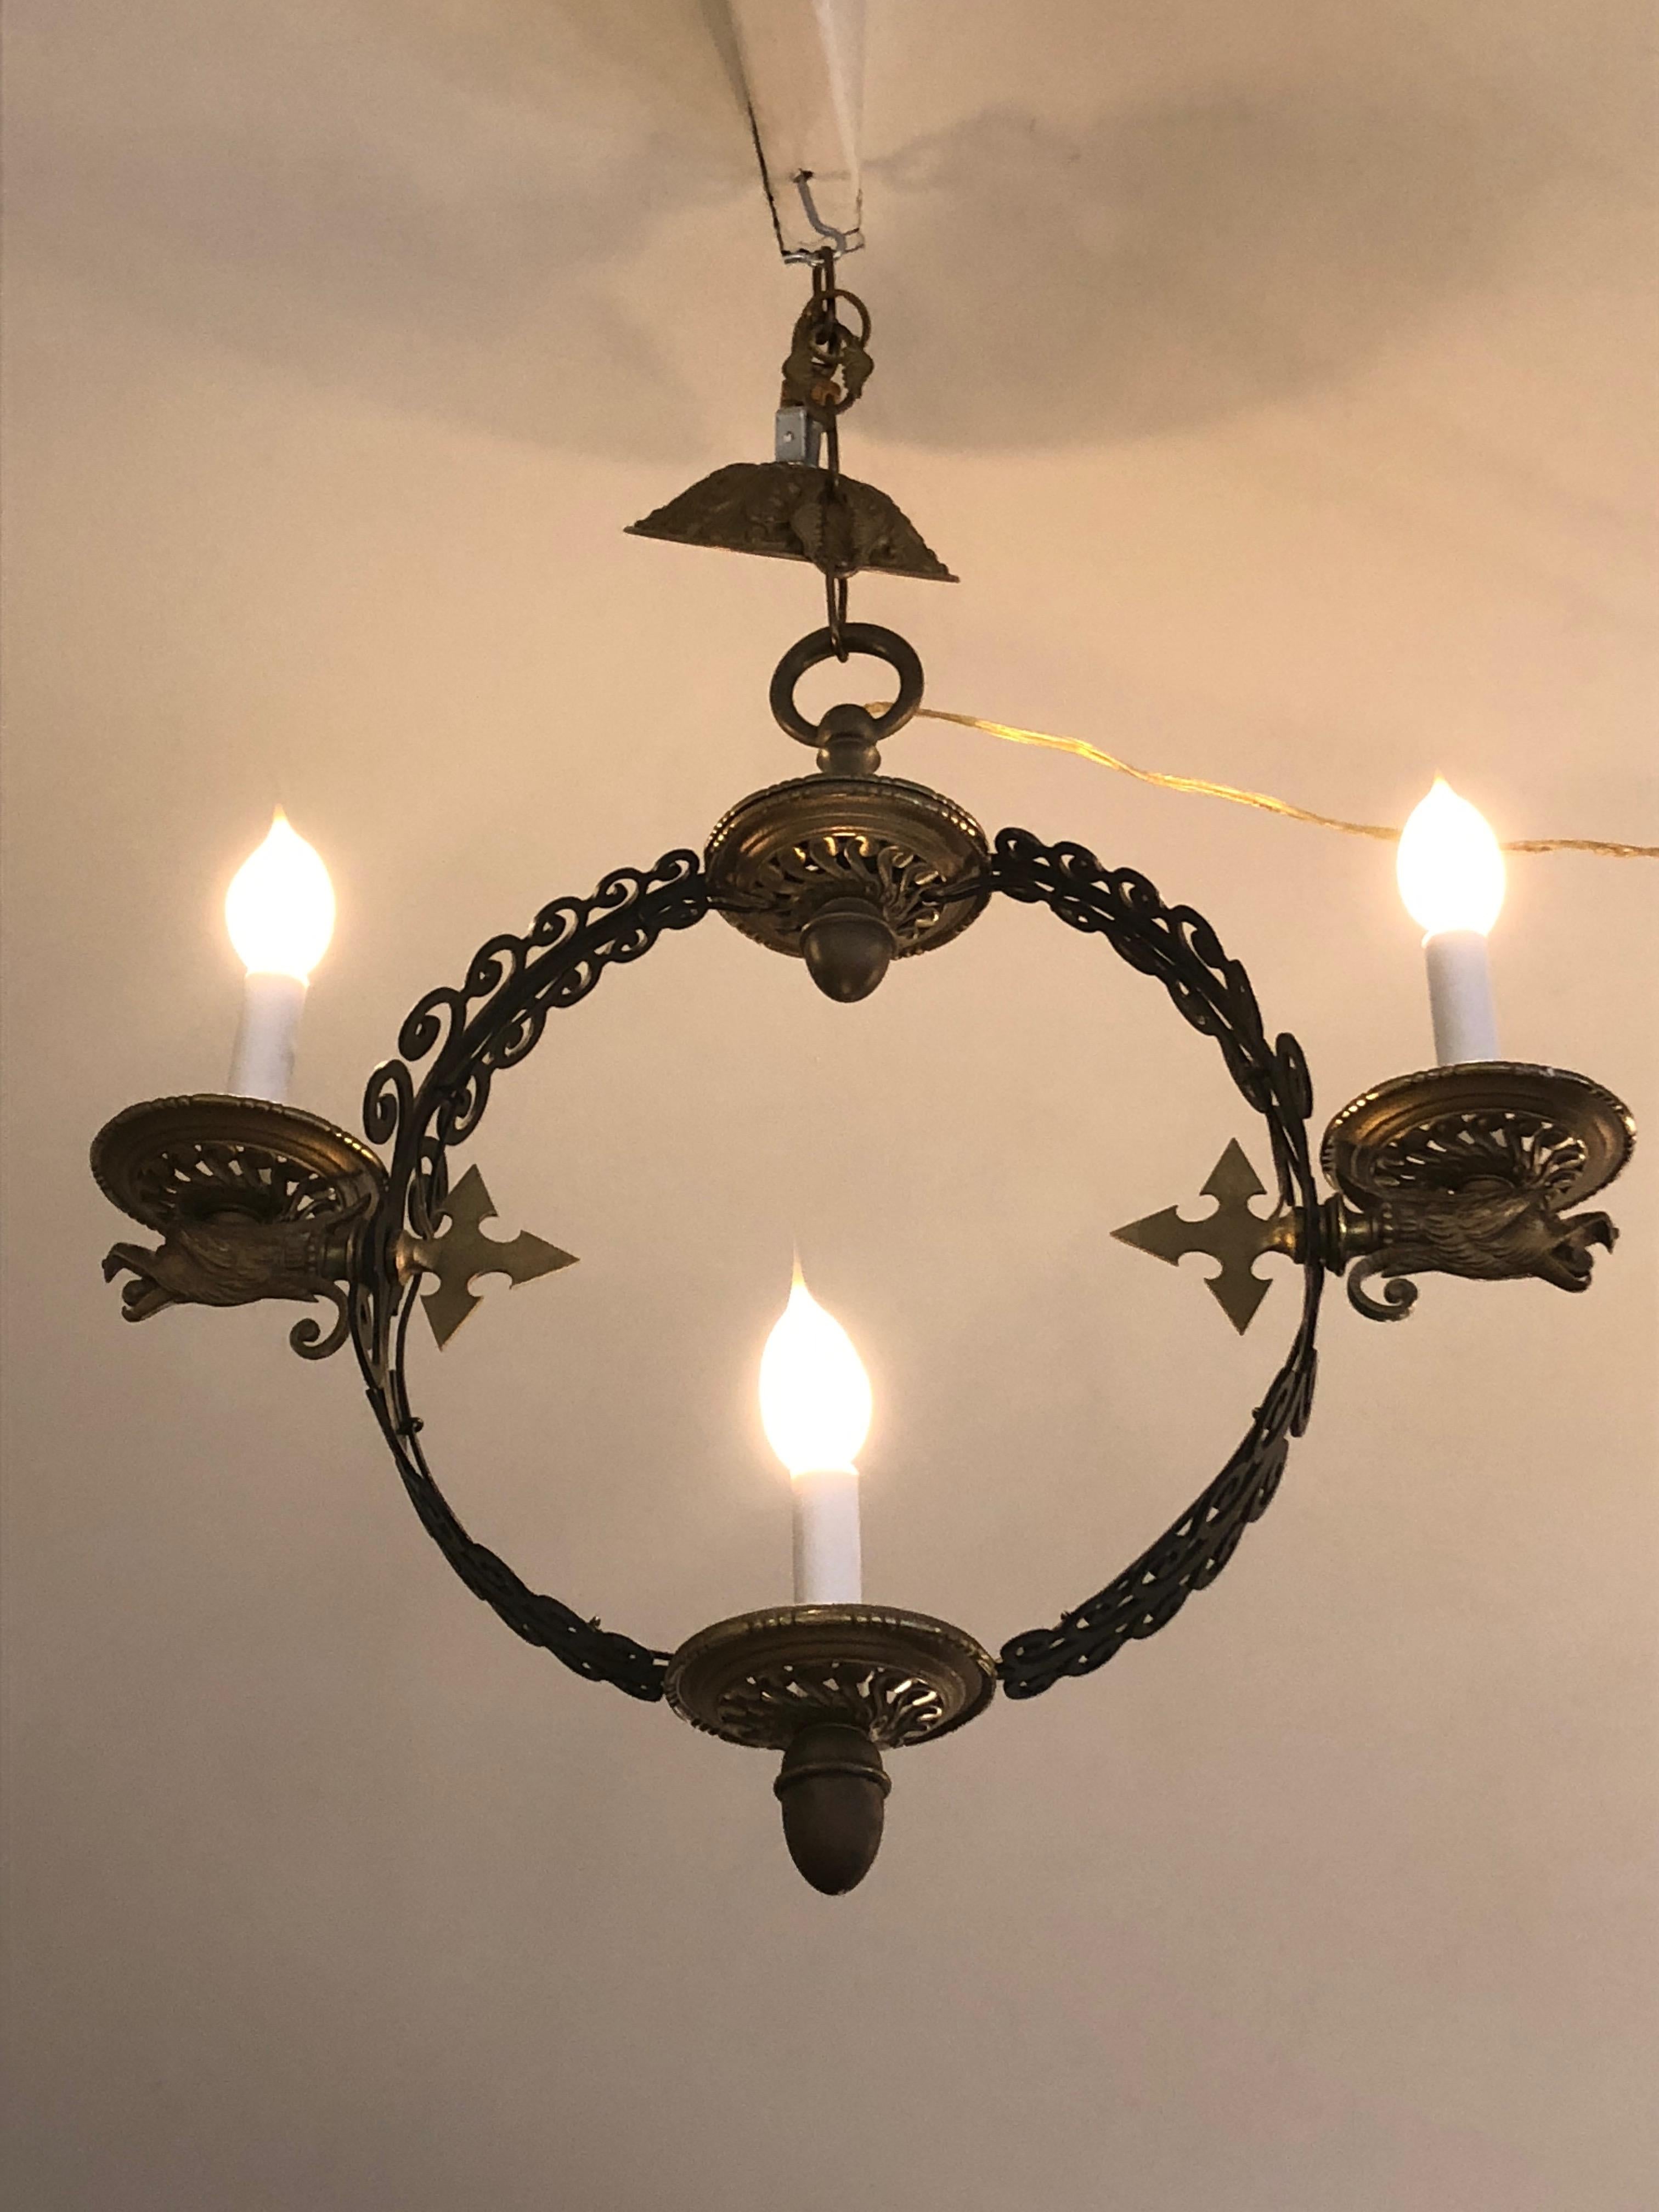 A pair of rare iron and antiqued brass light fixtures having an open circle with iron curlicue scrollwork, around which three candlestick lights are set on brass candle cups. Accenting the candles are amazing spearhead and falcon head motifs. Fully